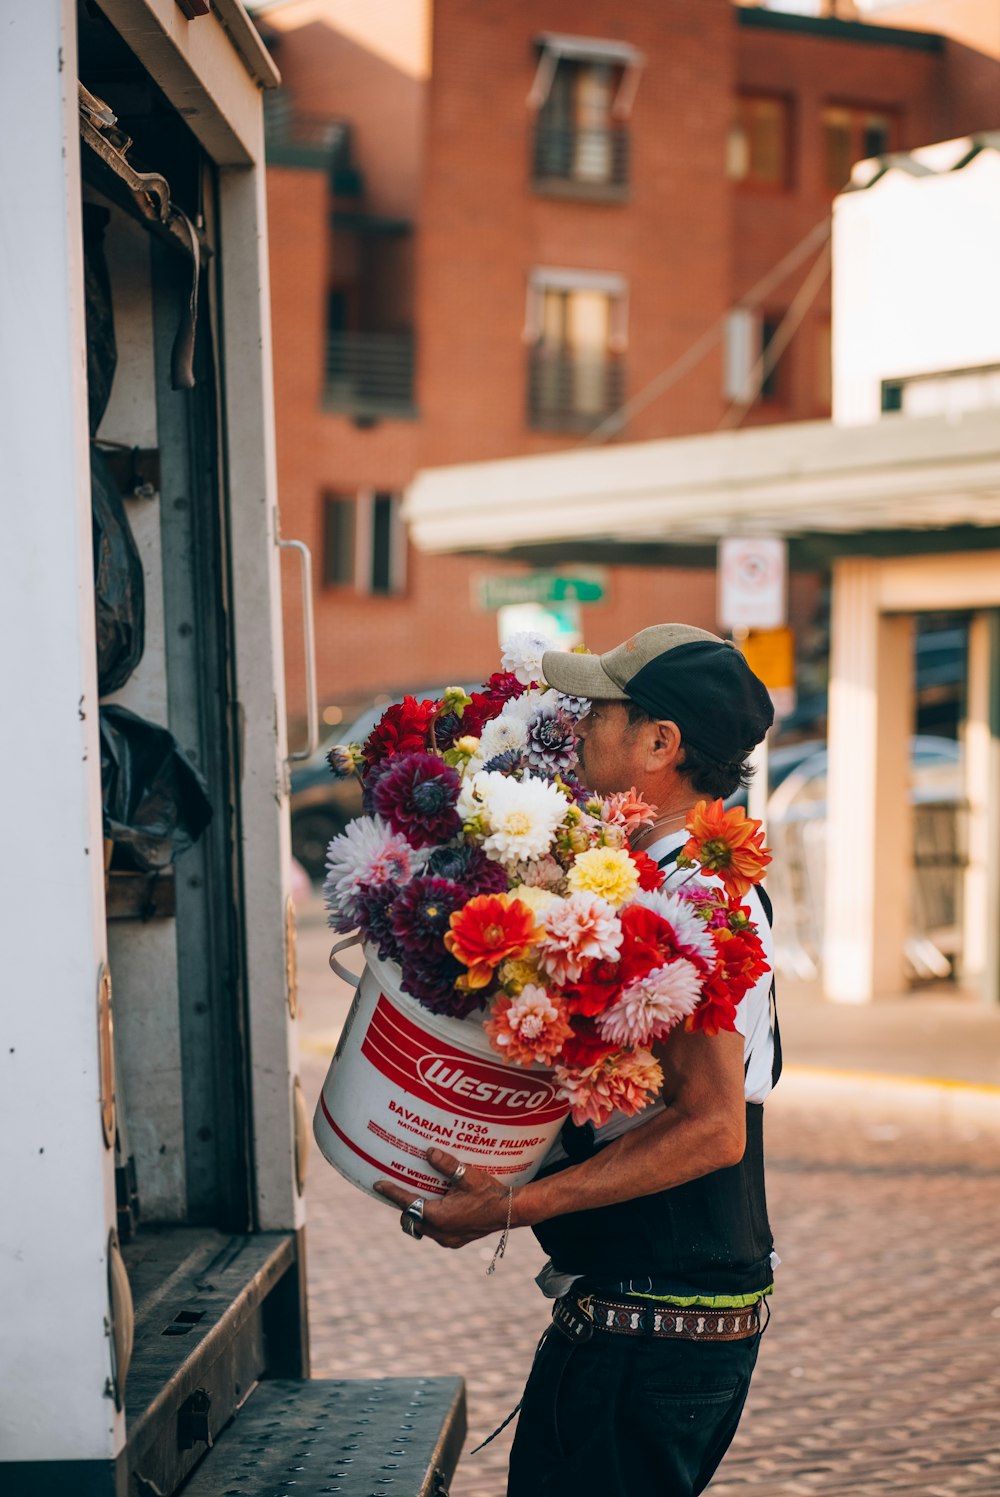 a man is holding a large bucket of flowers